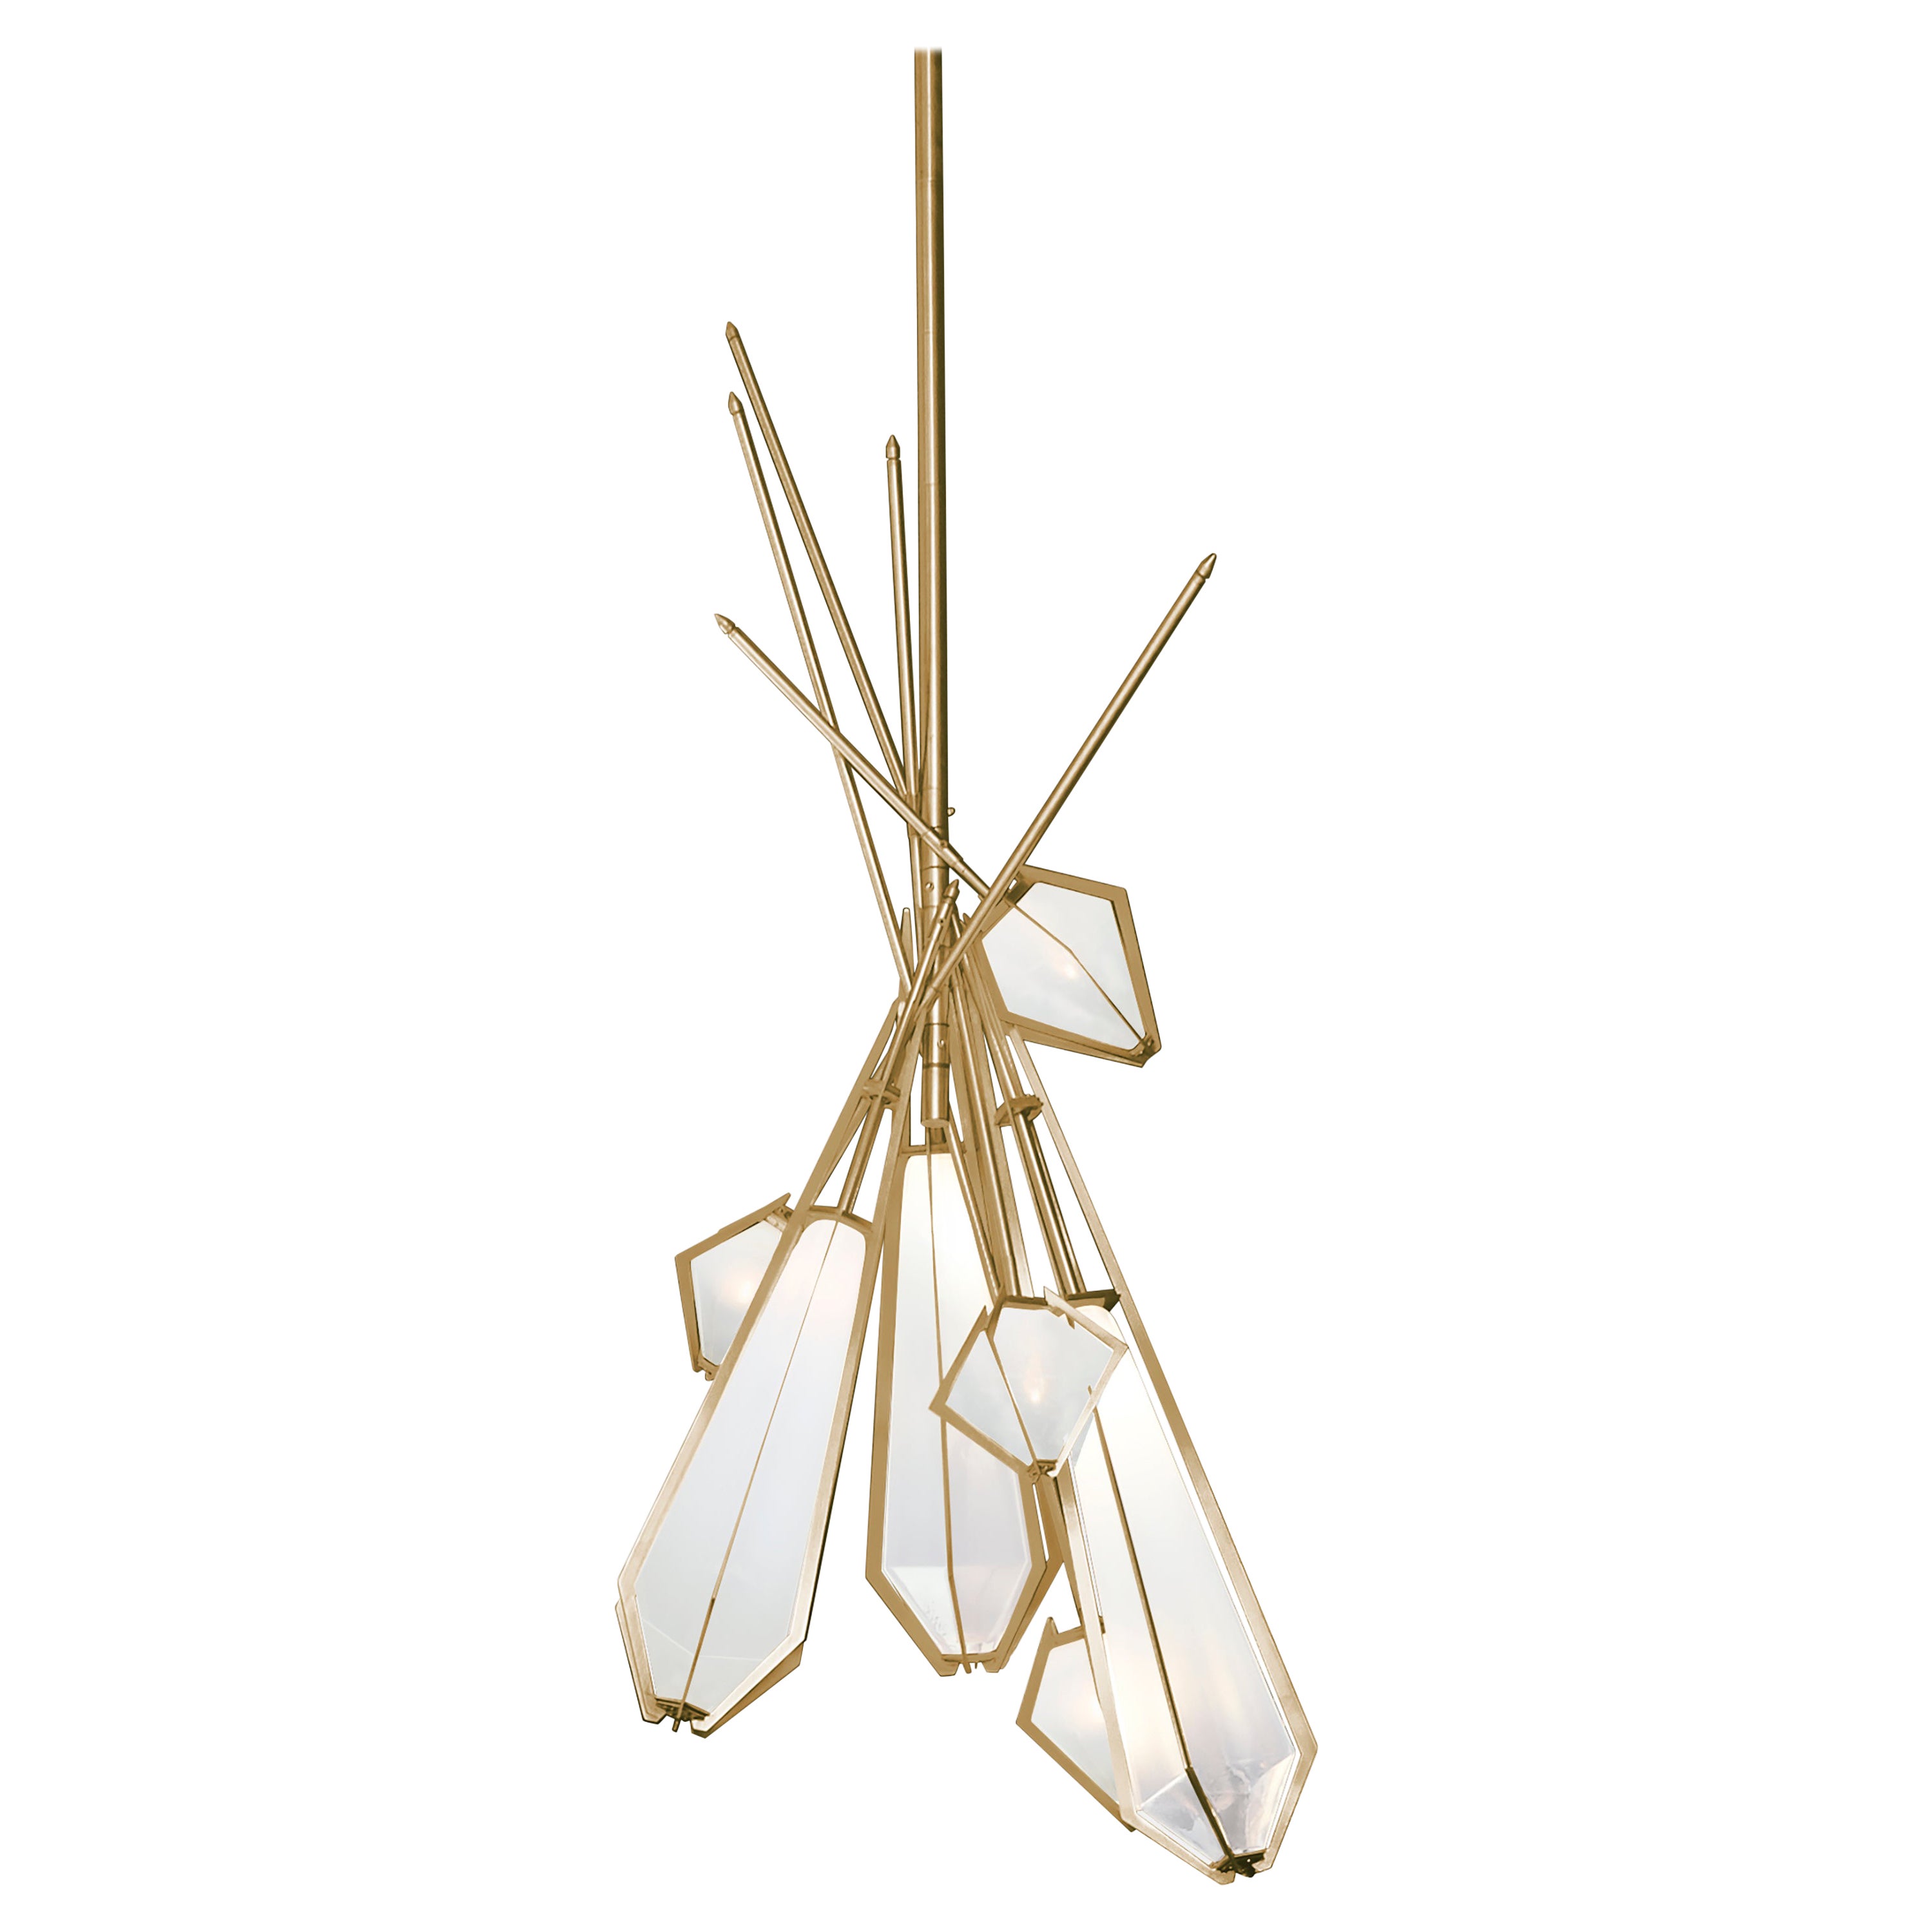 Harlow Dried Flowers Chandelier in Satin Brass and Alabaster White Glass For Sale